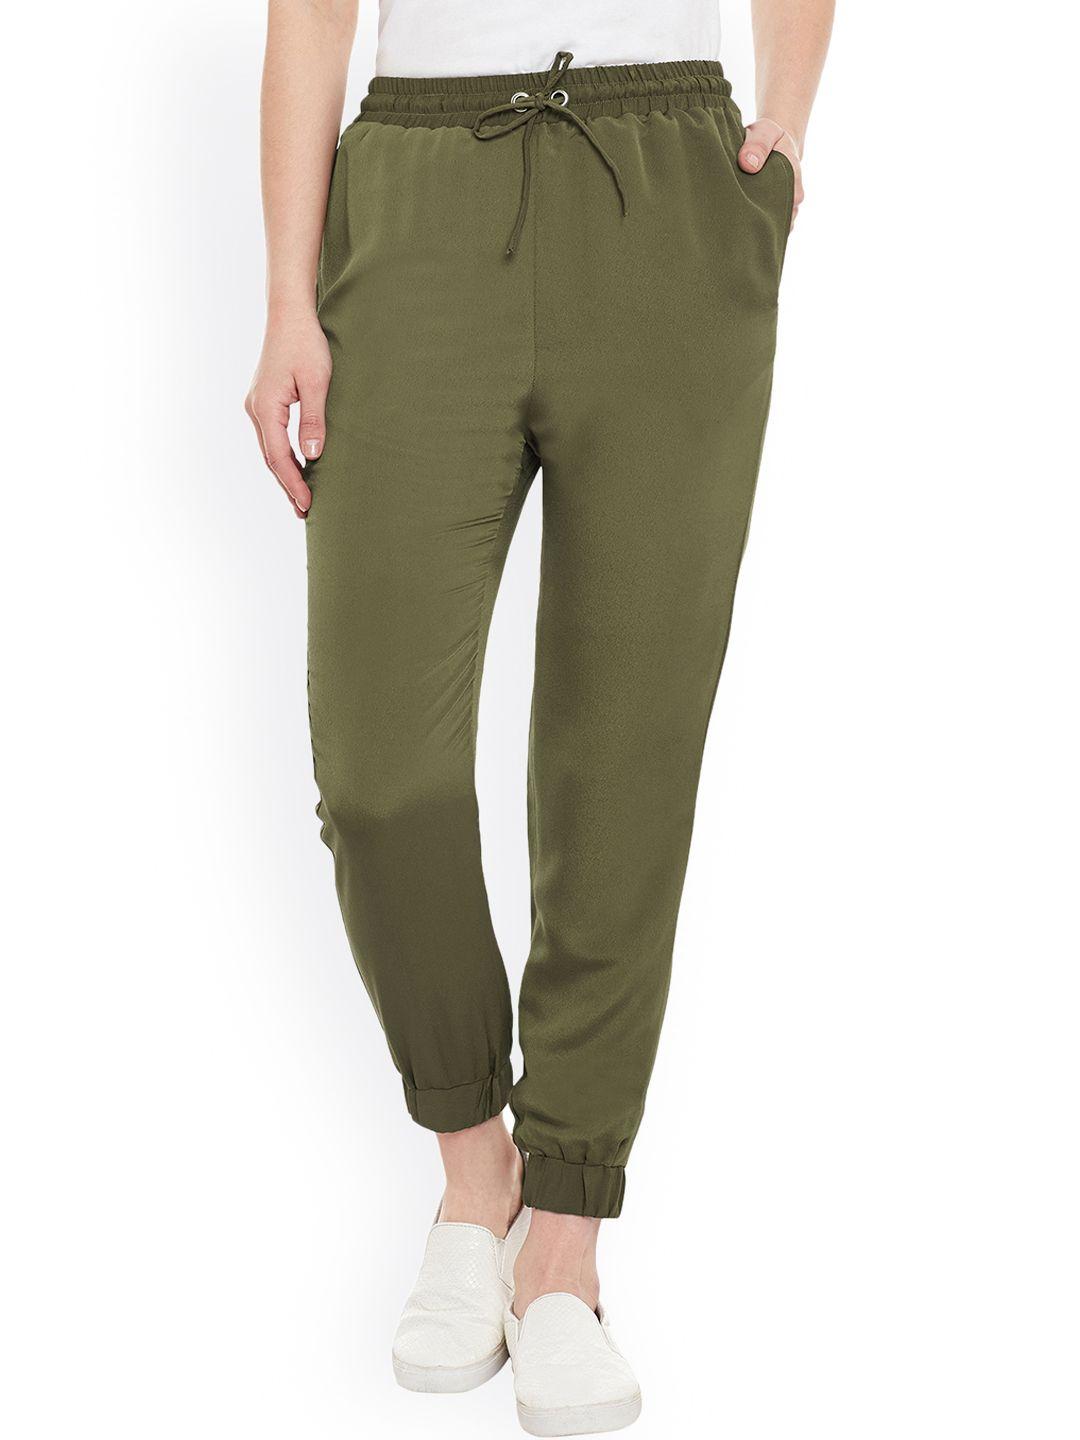 miss chase olive green jogger trousers